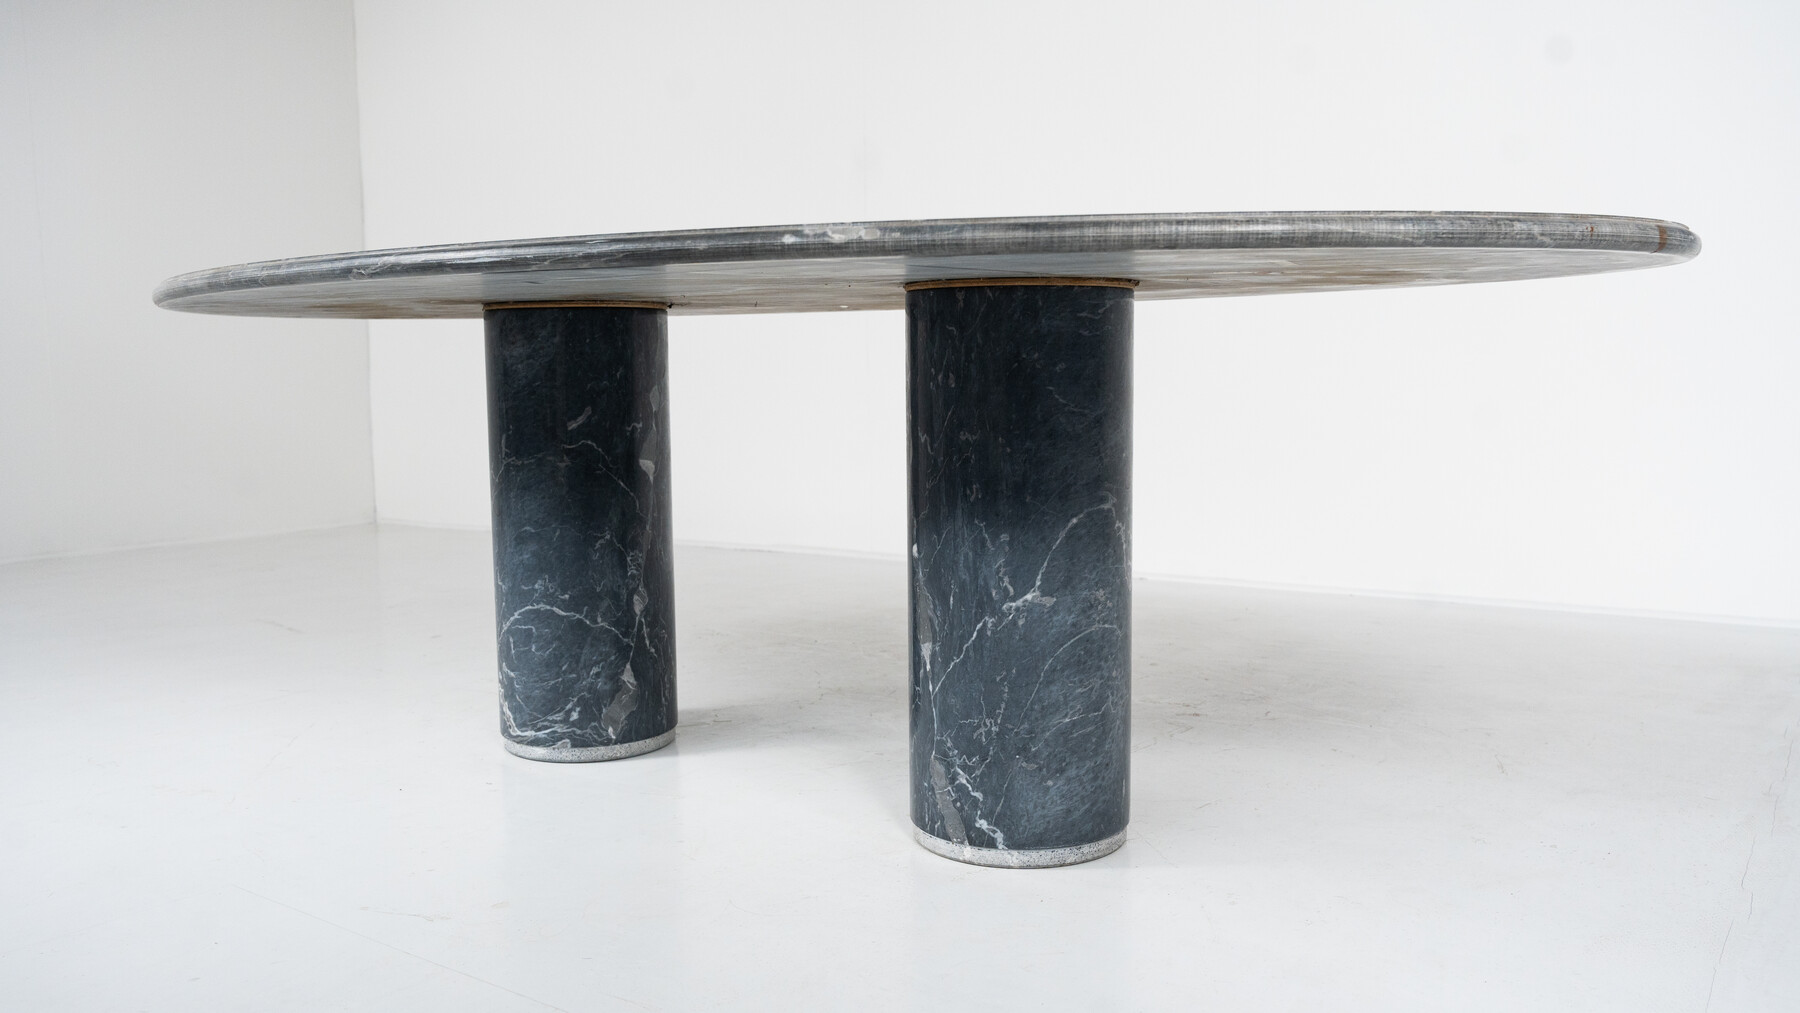 Ovale del Giardiniere Table by Achille Castiglioni for Upgroup, Marble, 1980s